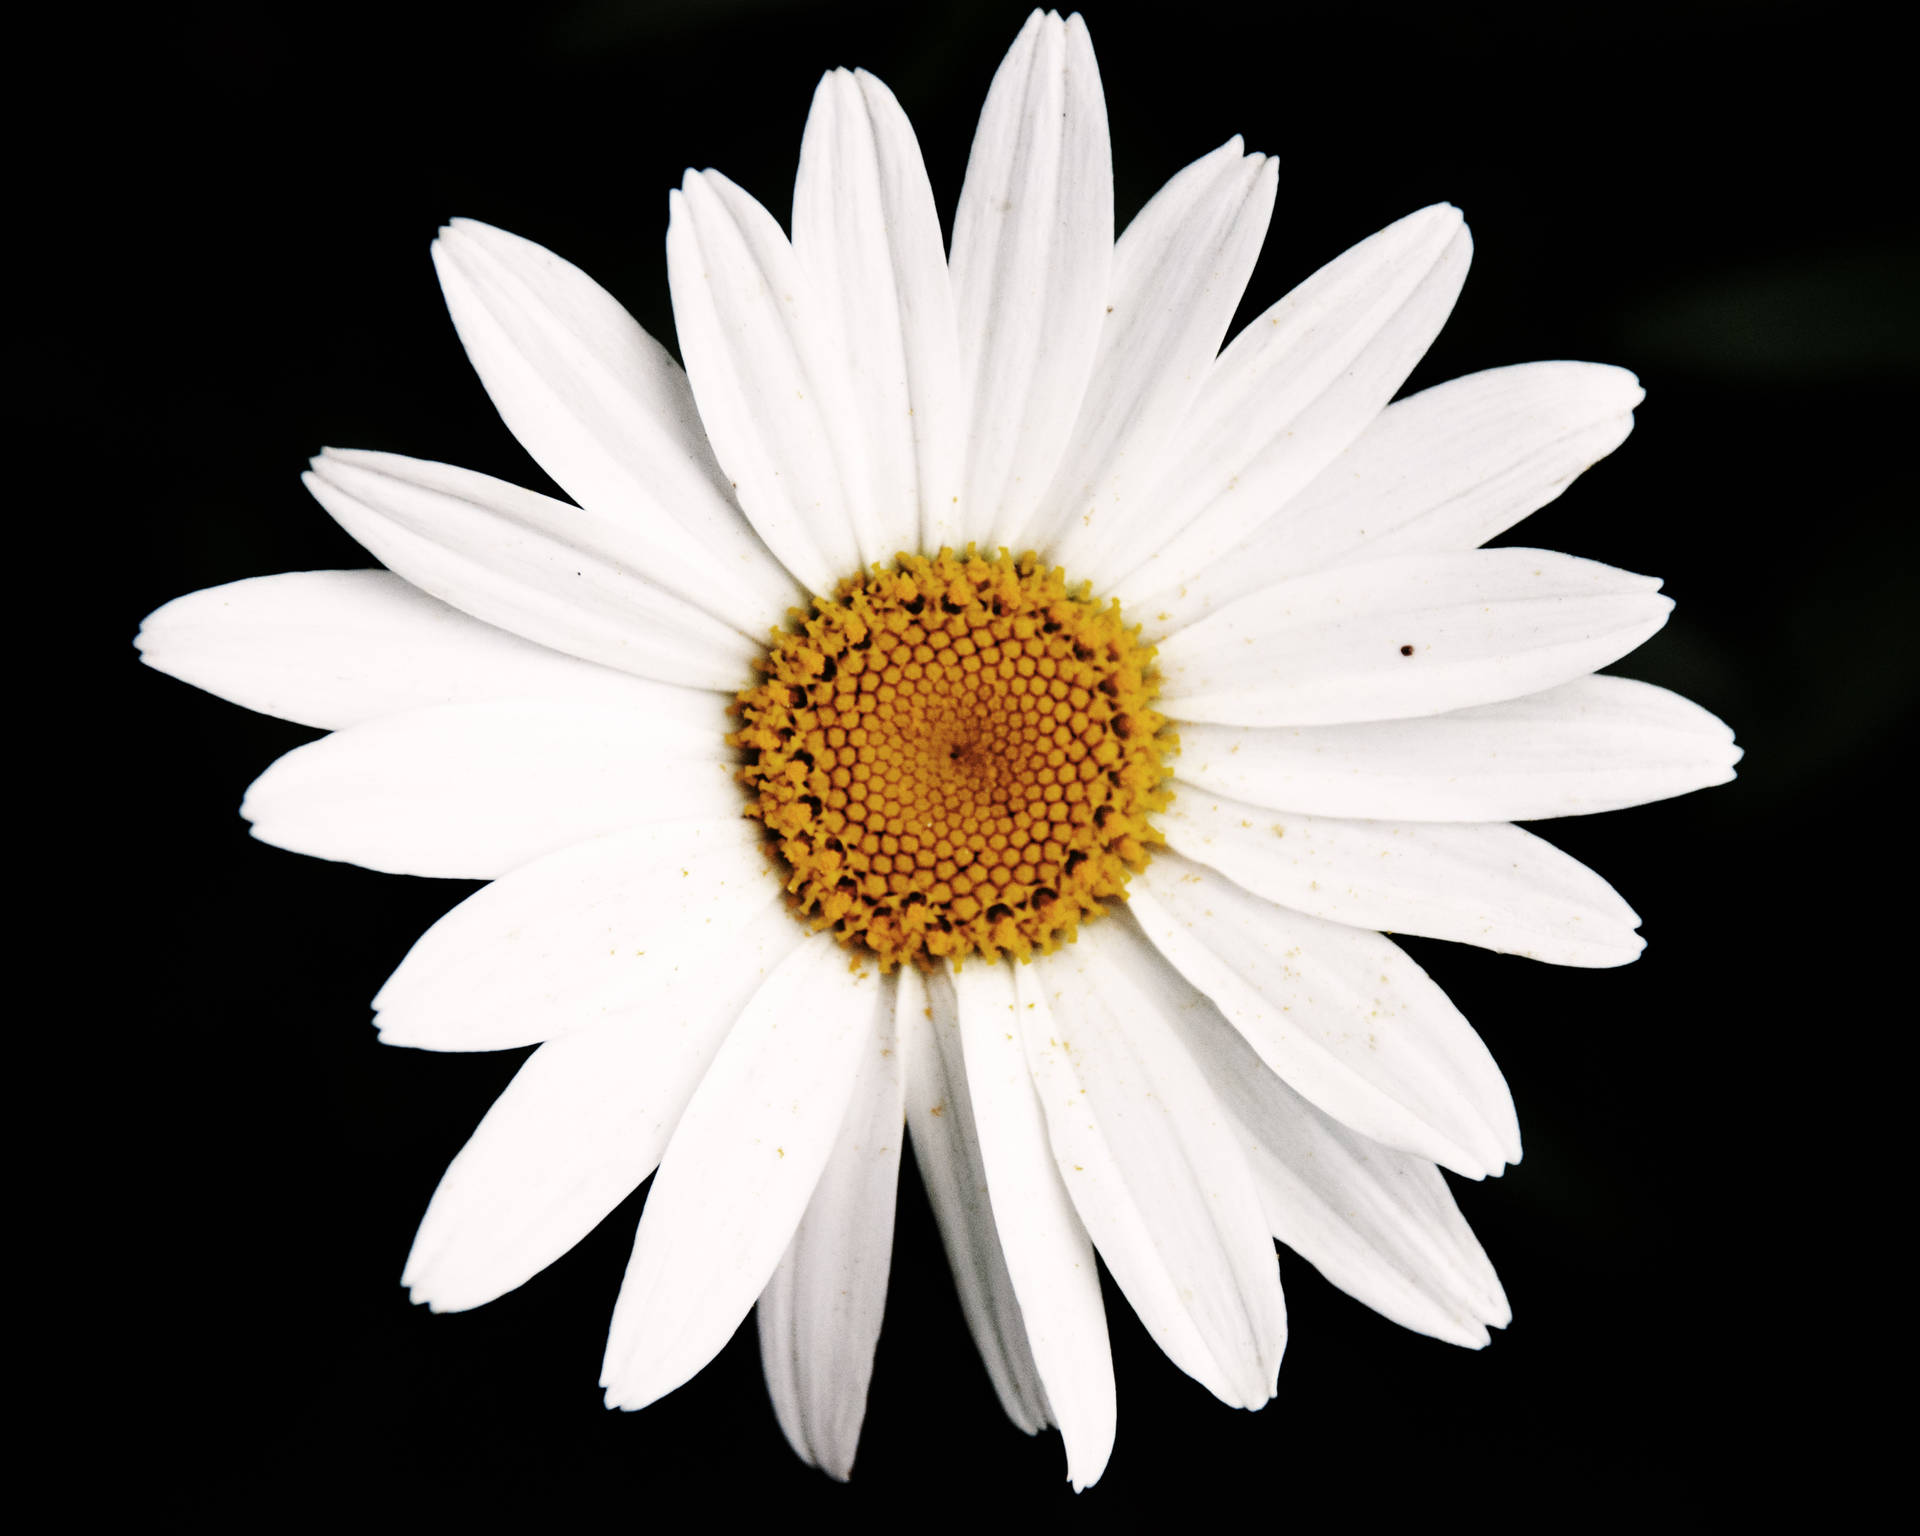 Daisy 3160X2528 Wallpaper and Background Image